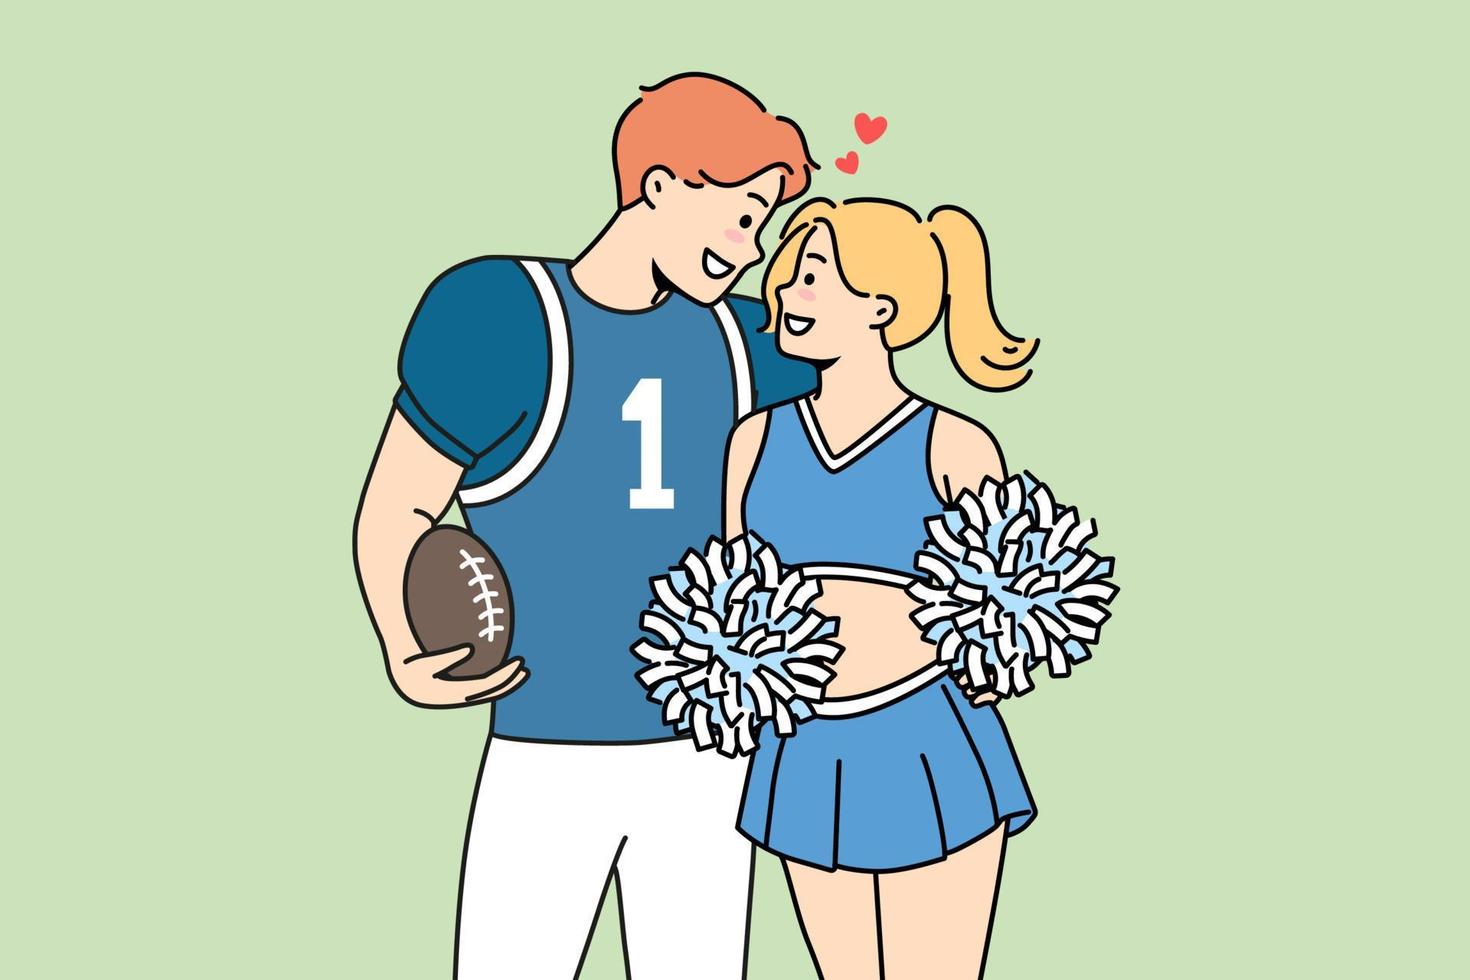 Smiling teen couple in sport uniform hugging. Happy guy American football player and girl cheerleader embrace. Love and relationships. Vector illustration.